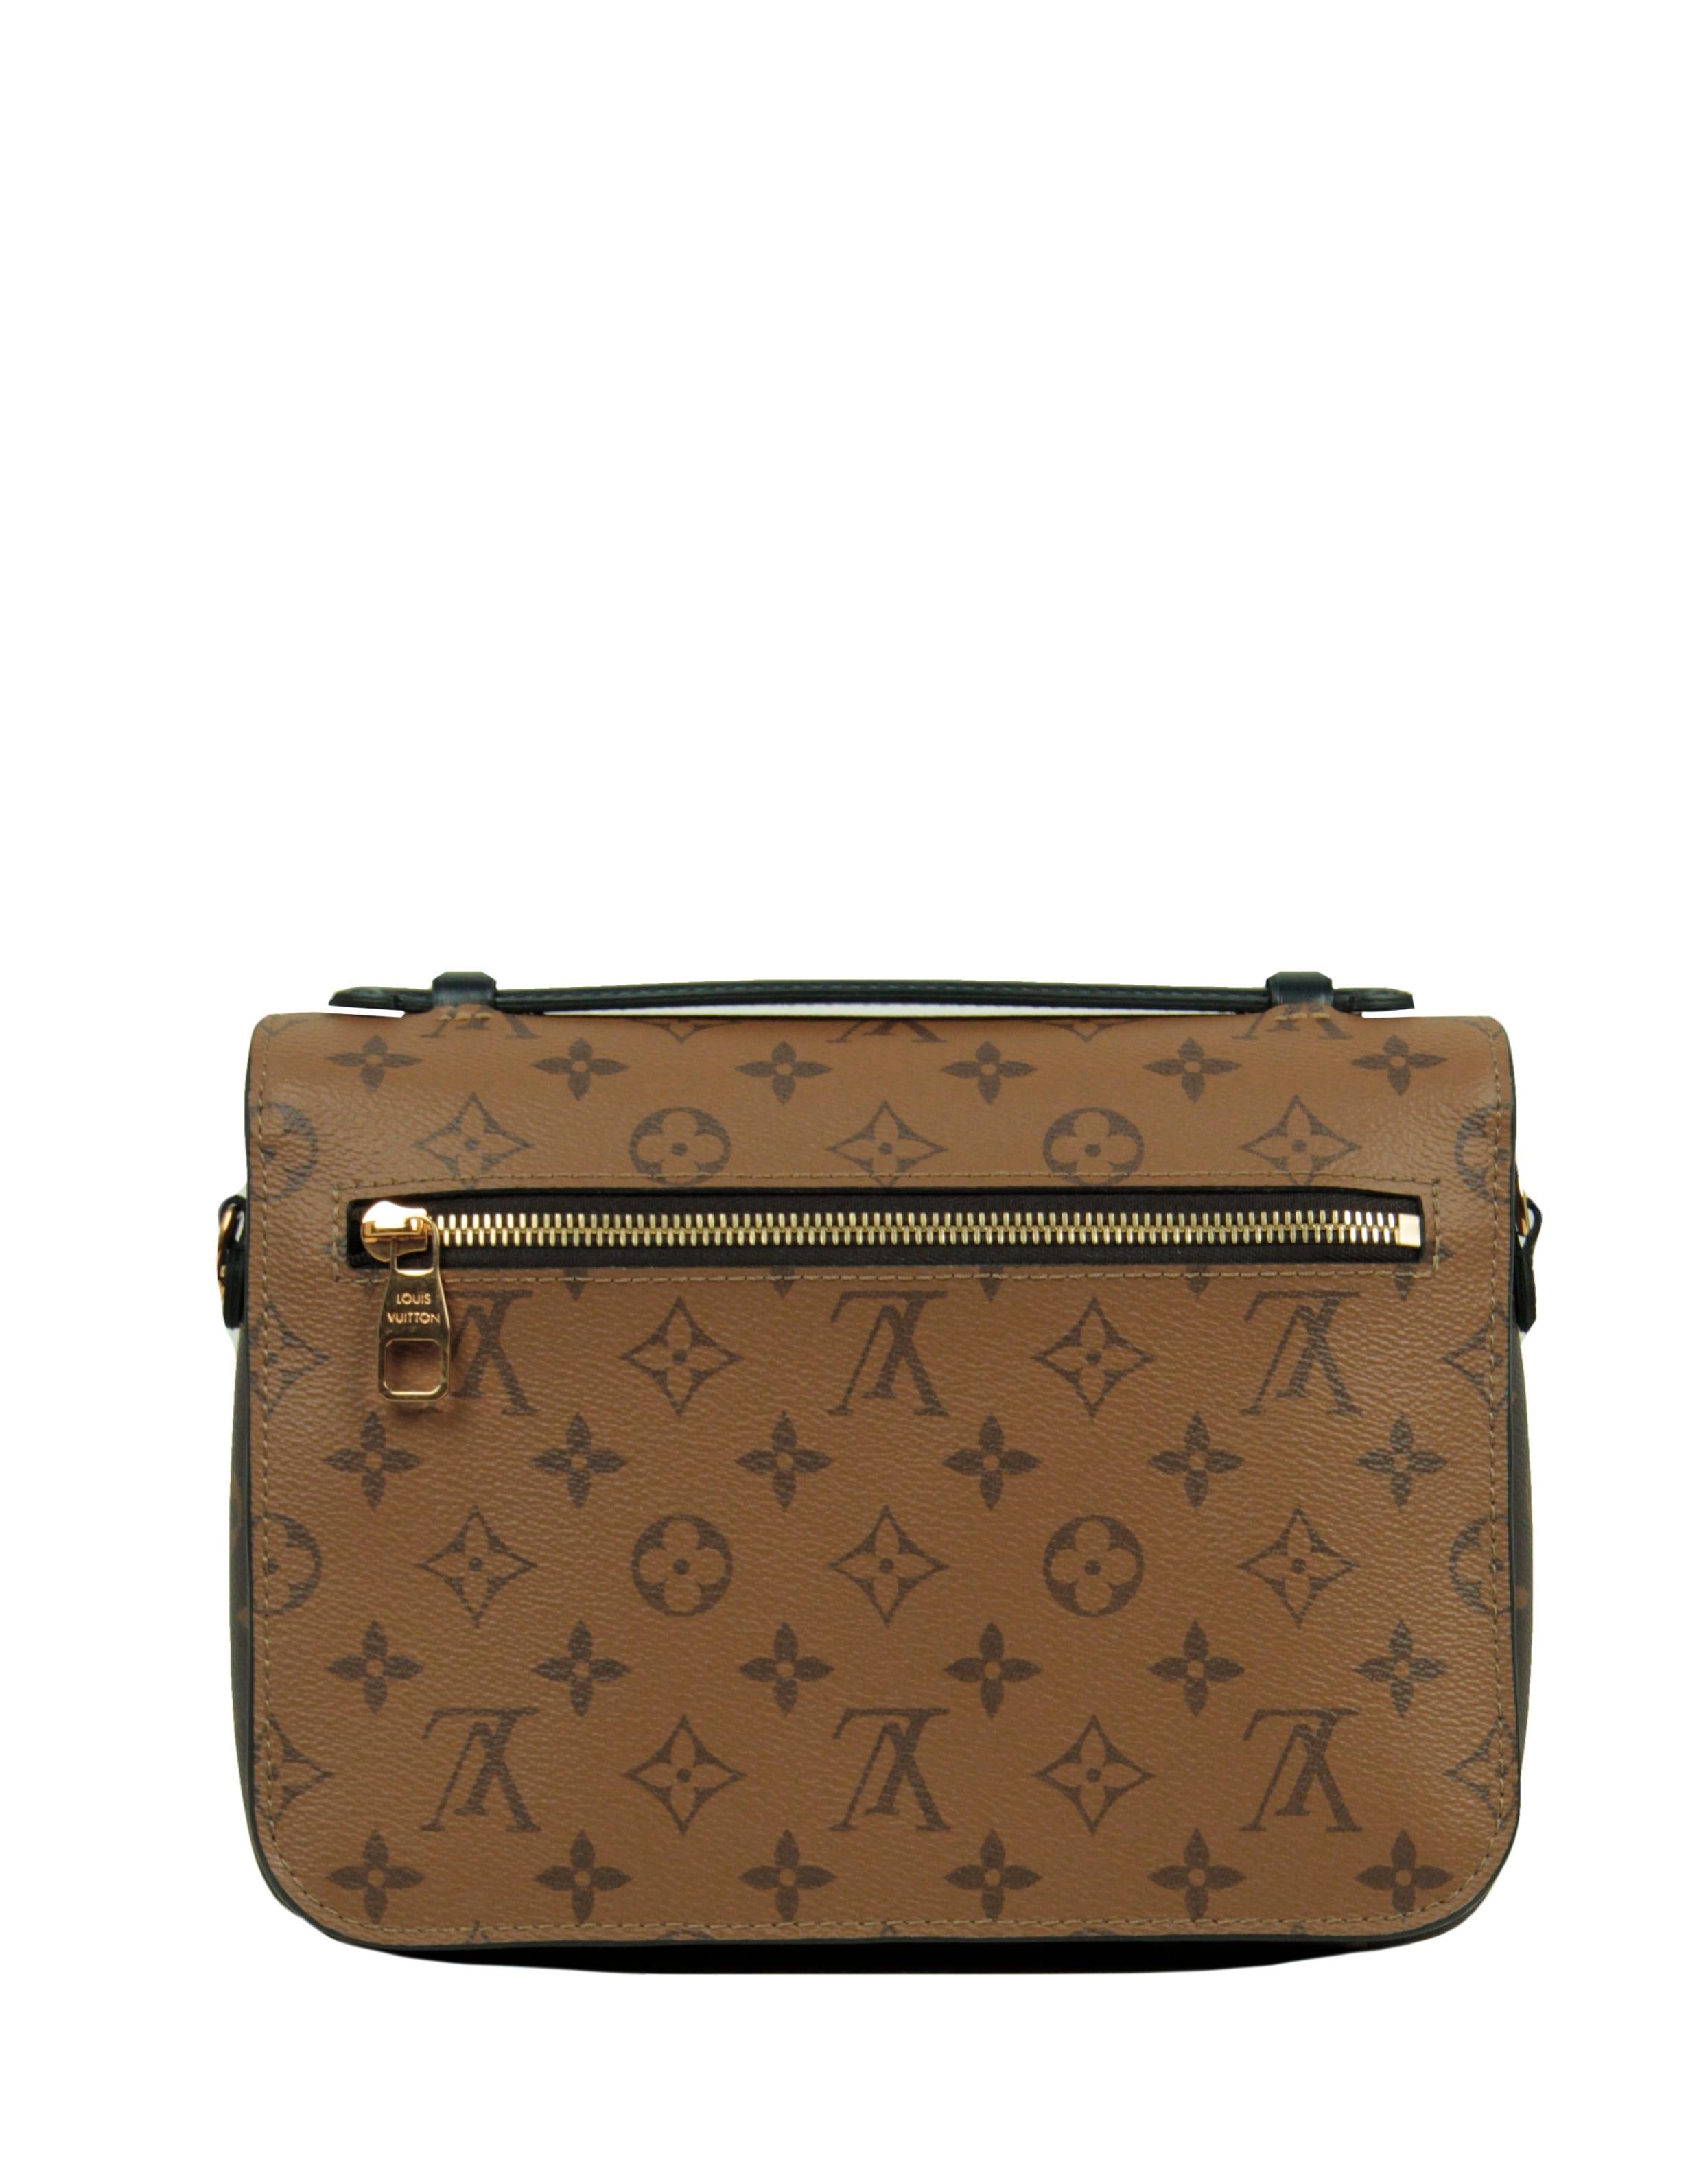 Louis Vuitton Reverse Monogram Pochette Metis Messenger Bag In Excellent Condition For Sale In New York, NY